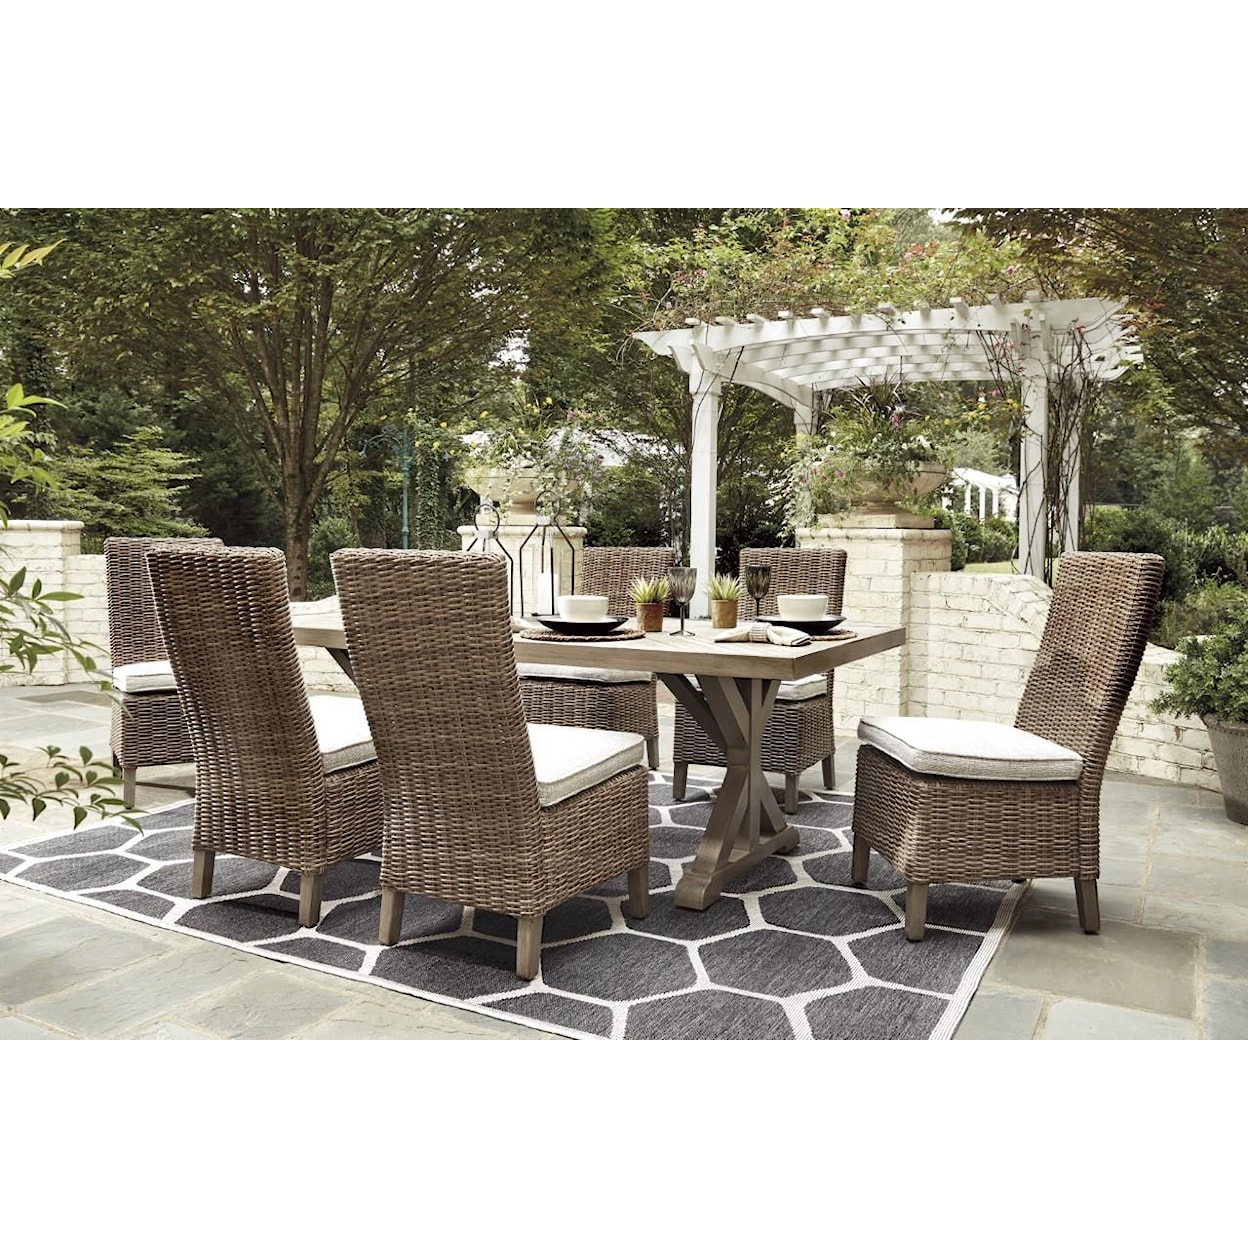 Belfort Select Bethany Outdoor Dining Set